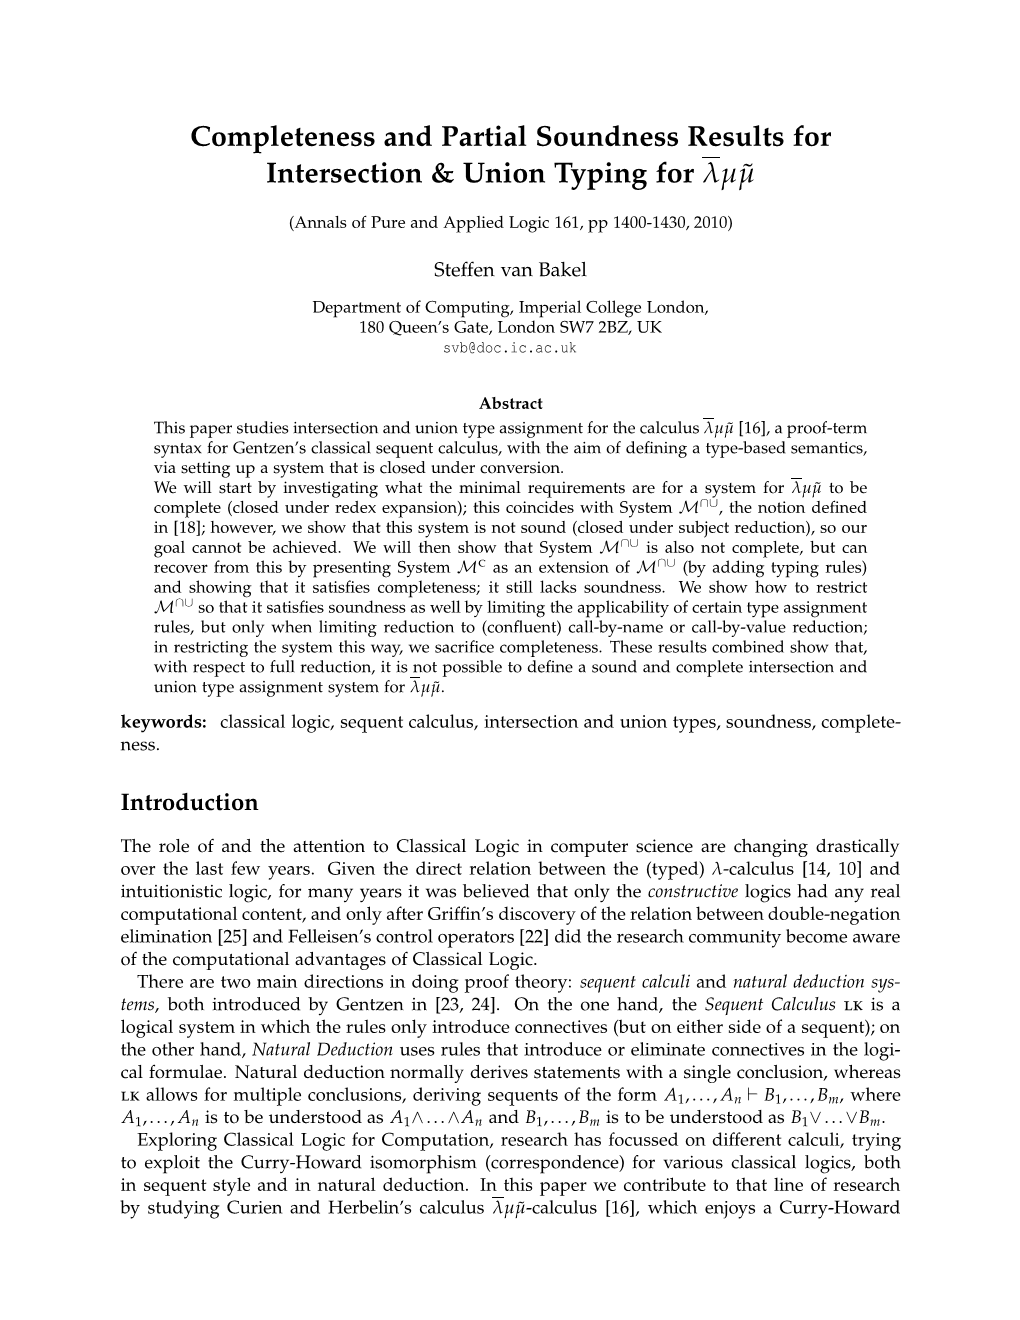 Completeness and Partial Soundness Results for Intersection & Union